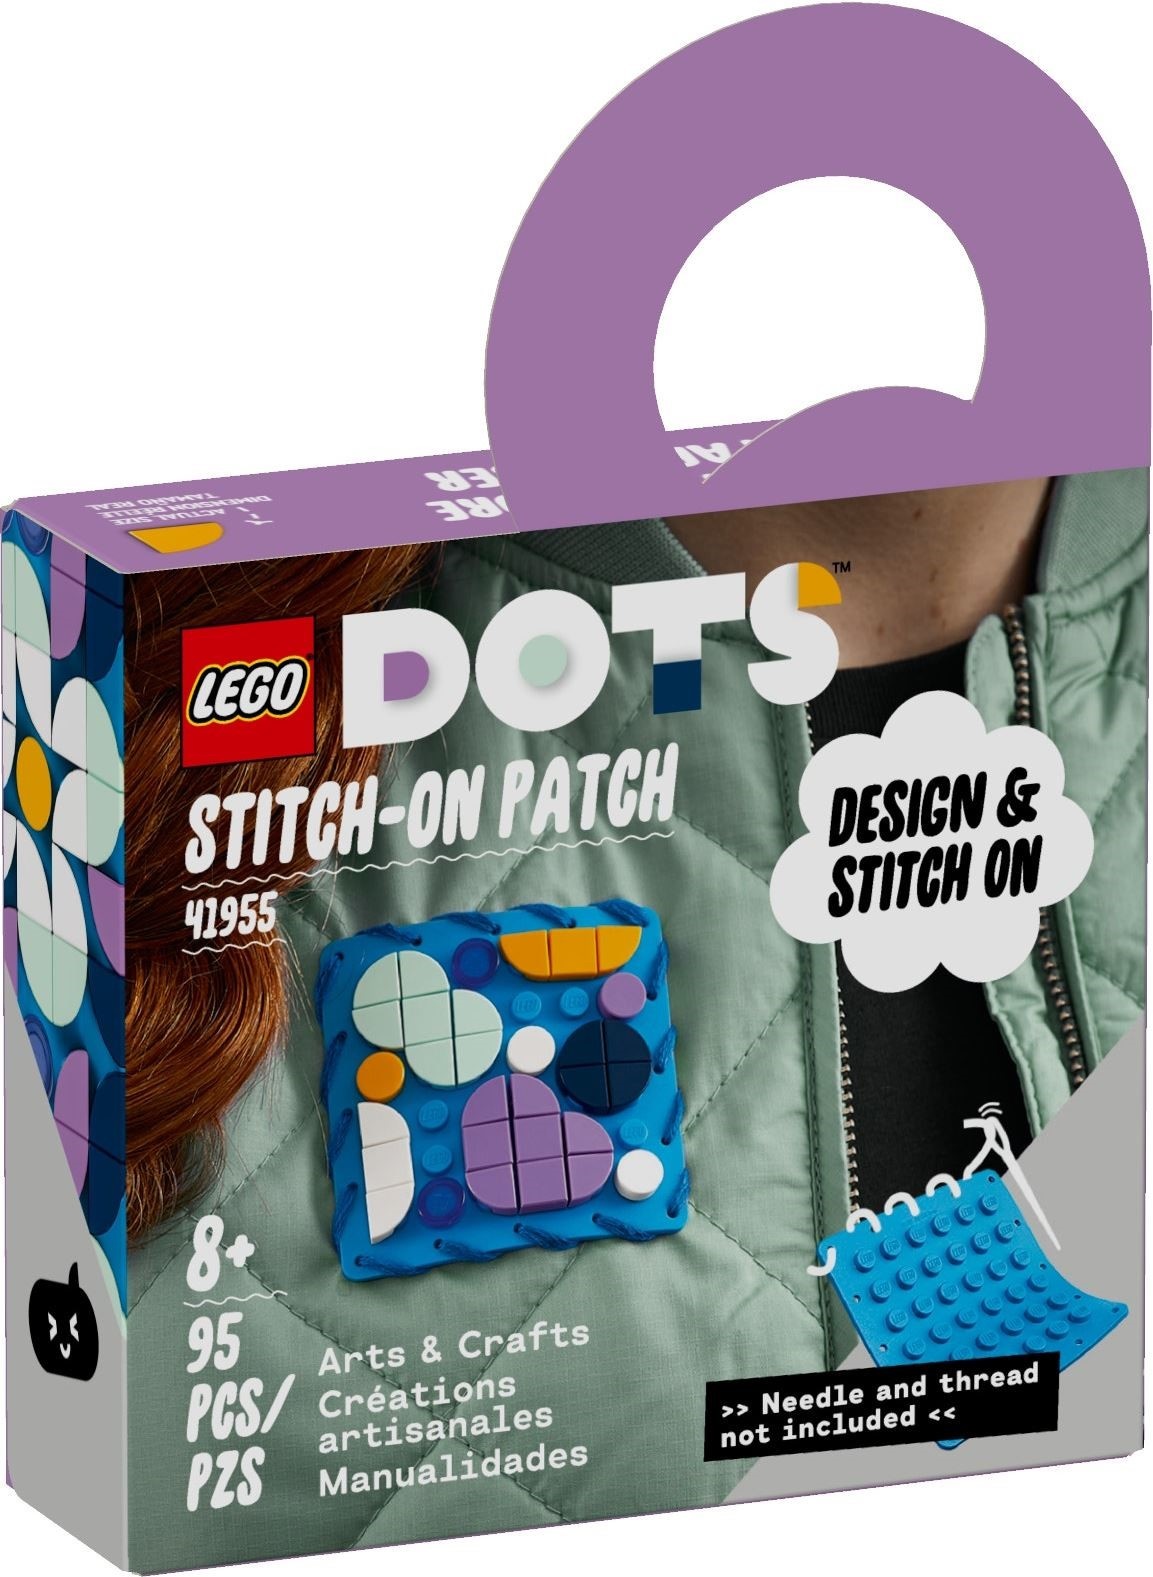  LEGO DOTS Stitch-on Patch 41955 DIY Craft Decoration Building  Toy Set for Girls, Boys, and Kids Ages 8+; Customizable Fashion Kit for  Arts-and-Crafts Fans (95 Pieces) : Toys & Games